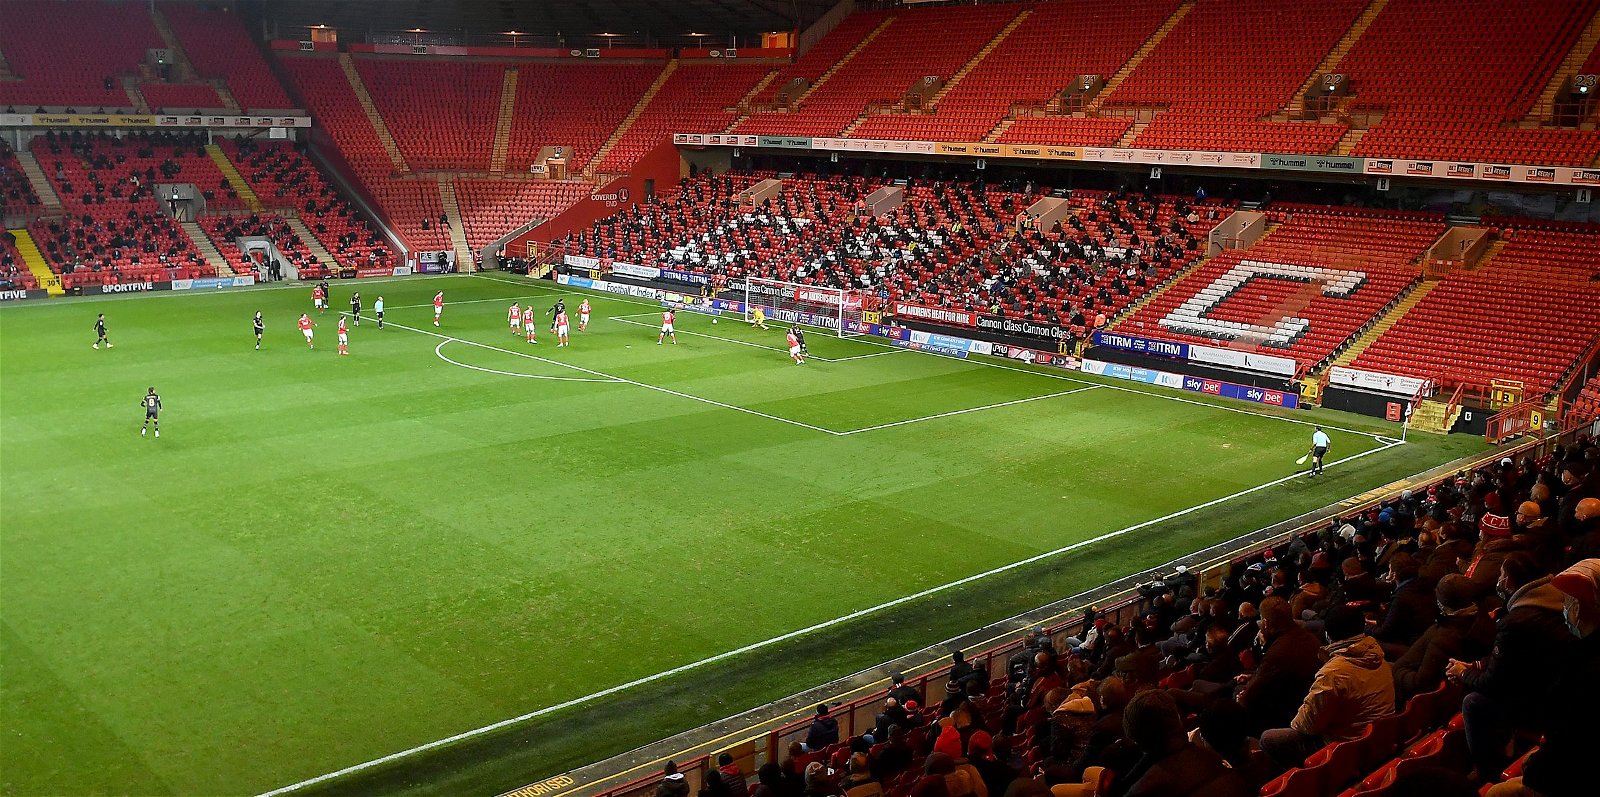 Charlton Athletic, Scottish Premiership side &#8216;likely&#8217; to make offer for Charlton Athletic man